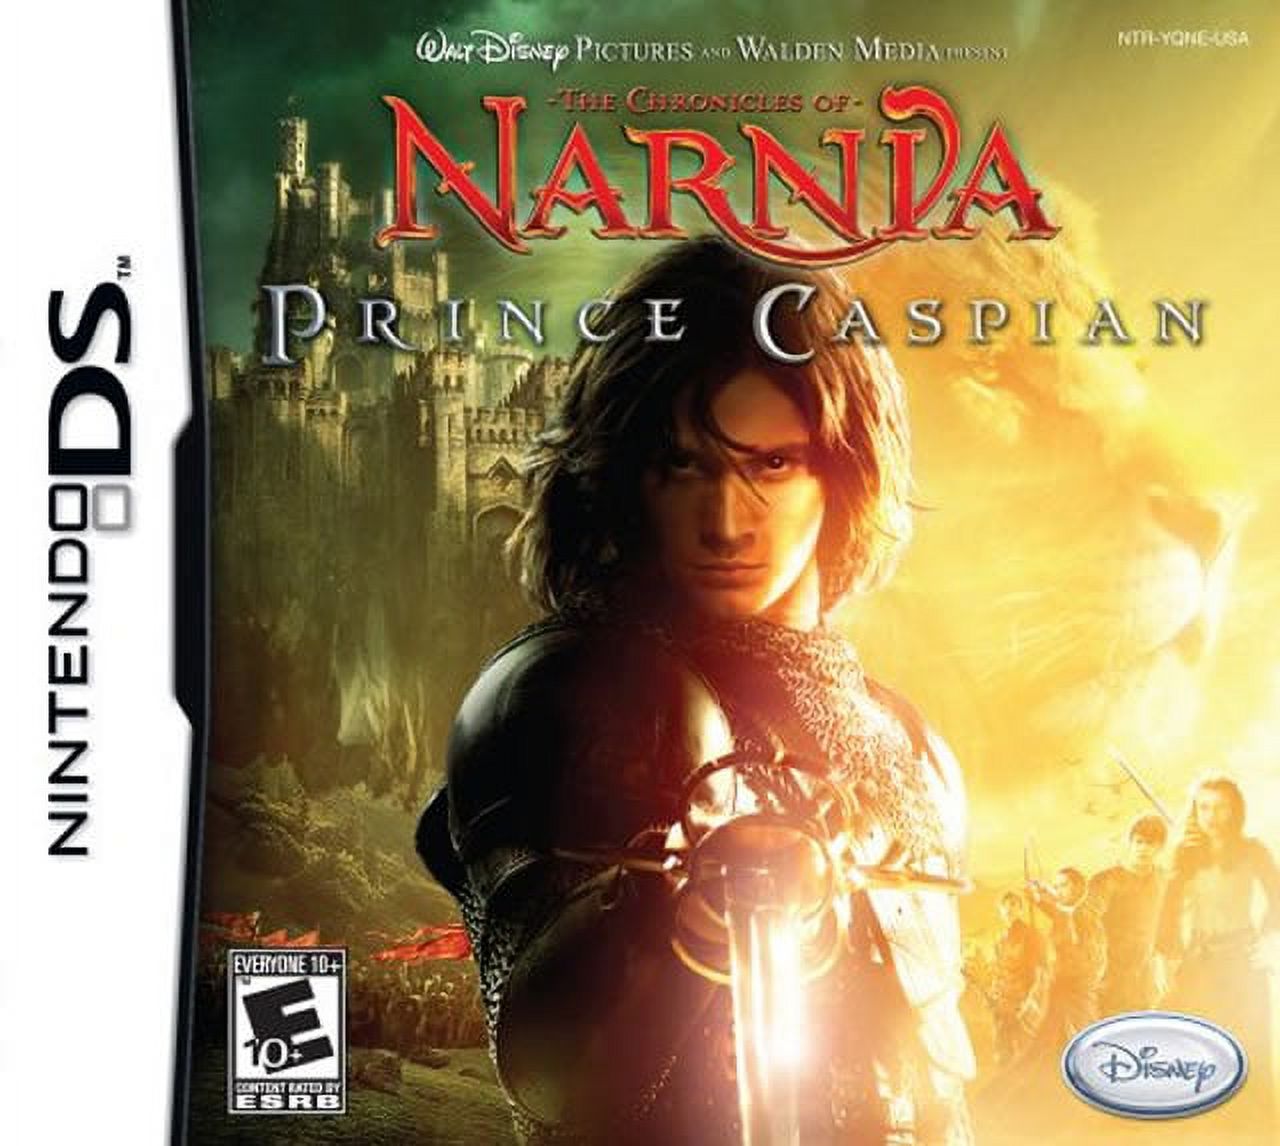 The Chronicles of Narnia: Prince Caspian - Nintendo DS - image 1 of 2